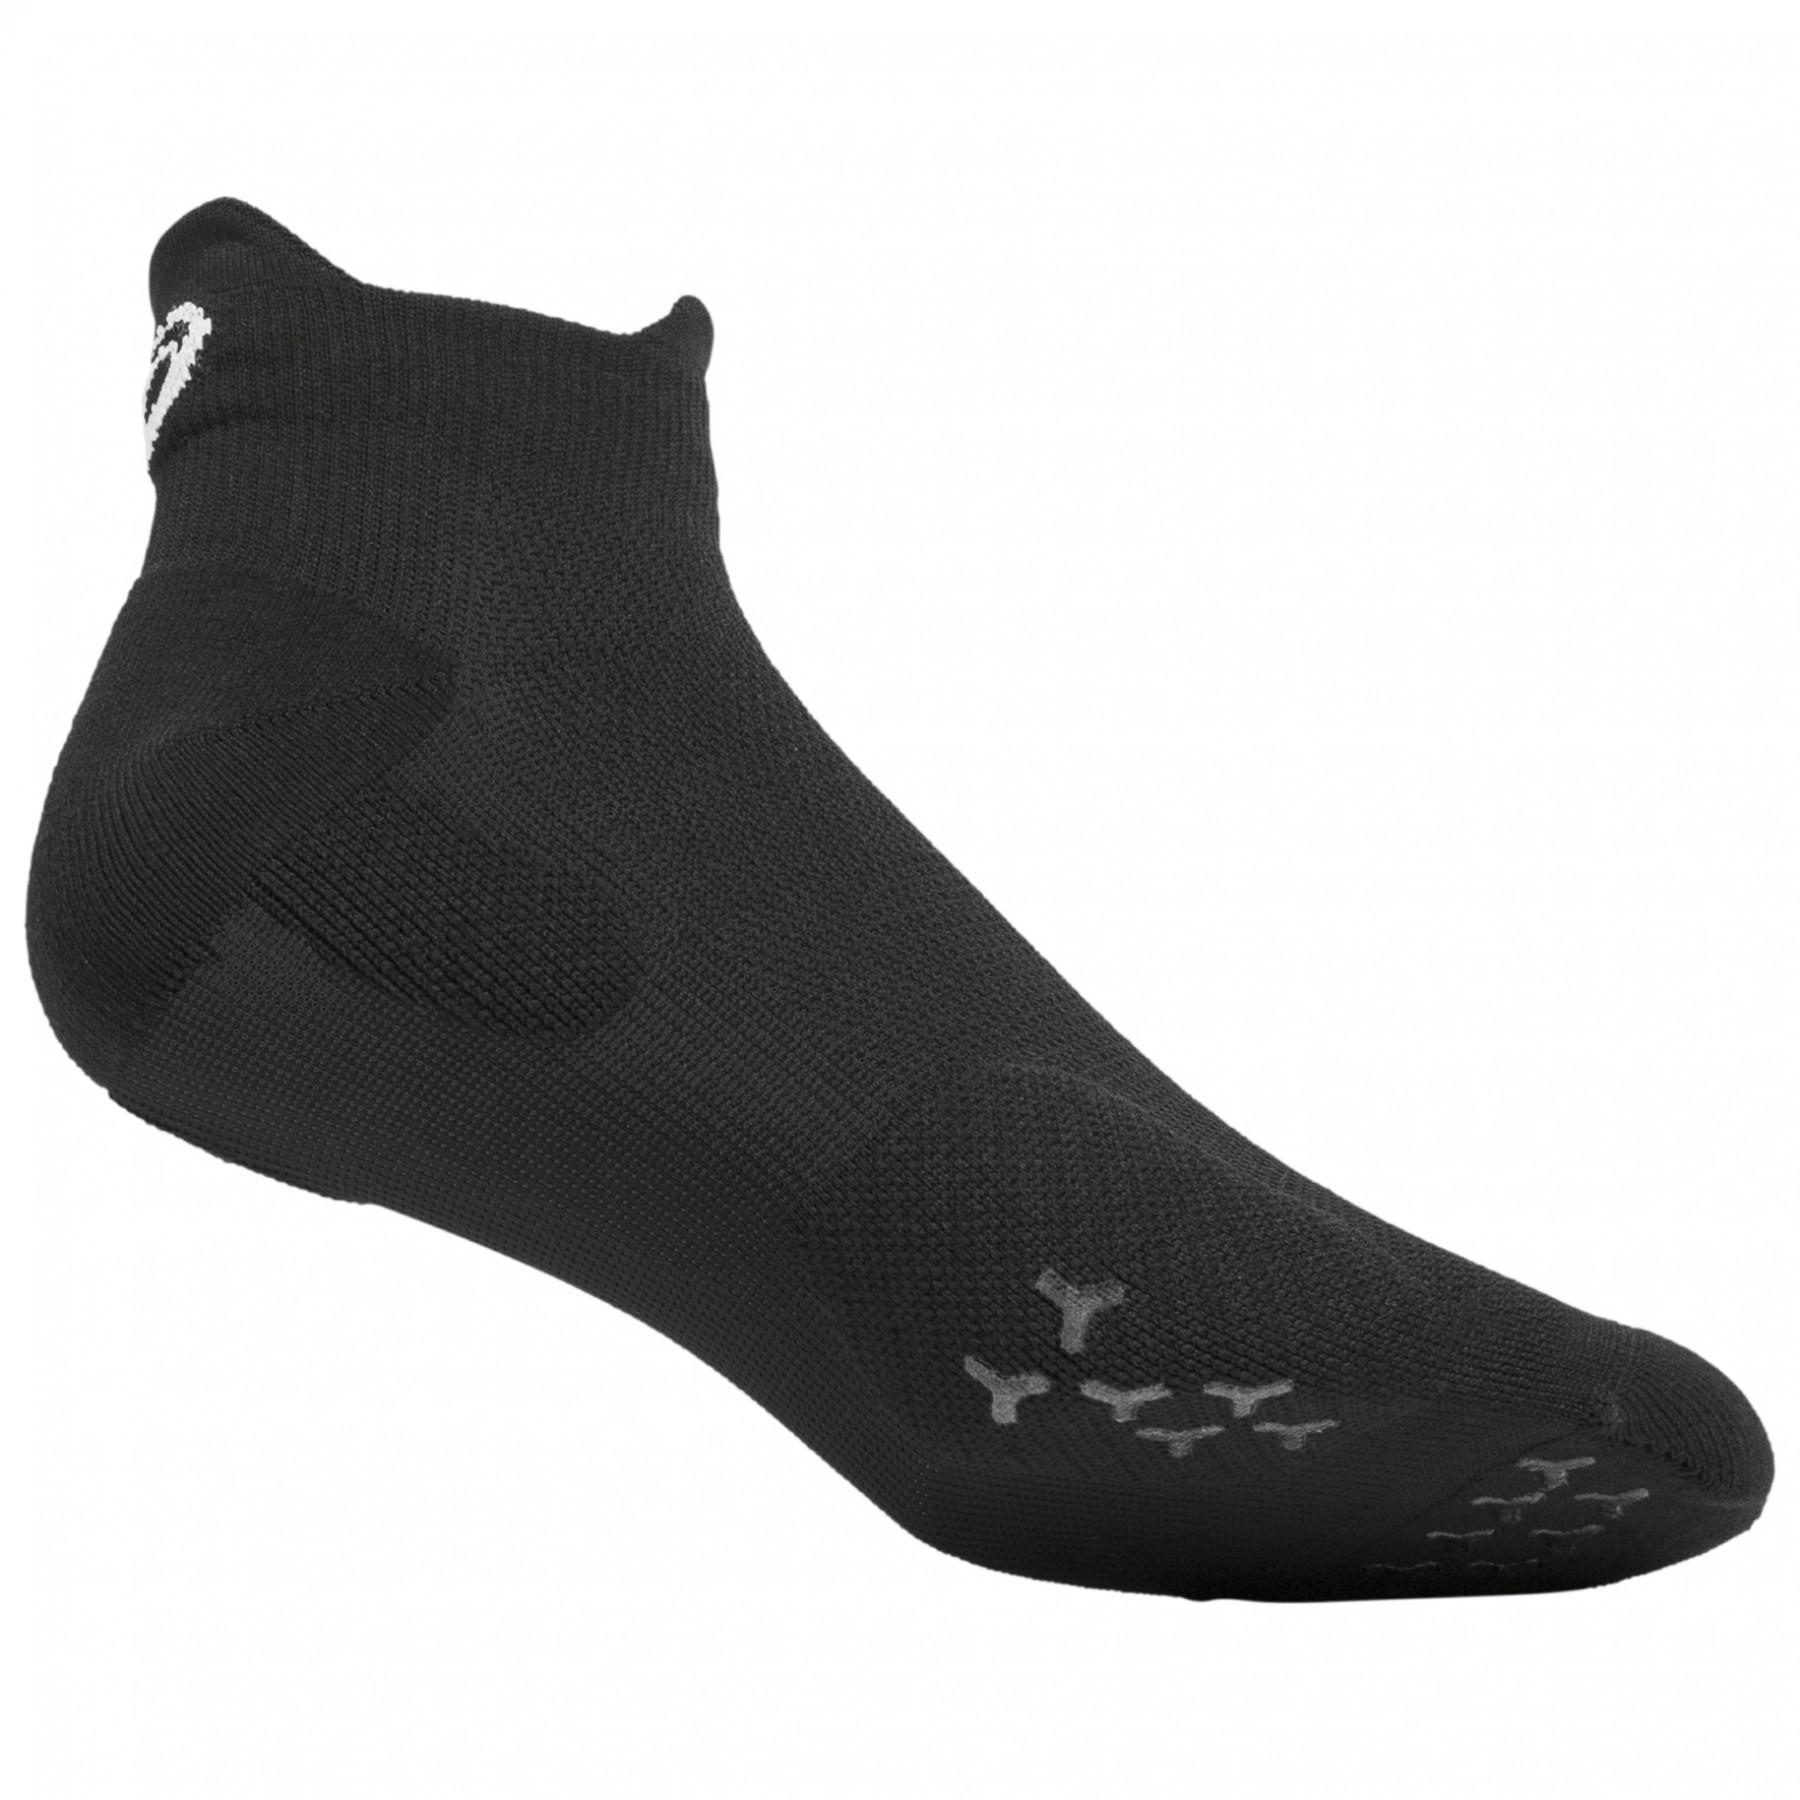 Chaussettes Asics Pro Fit Double Tab